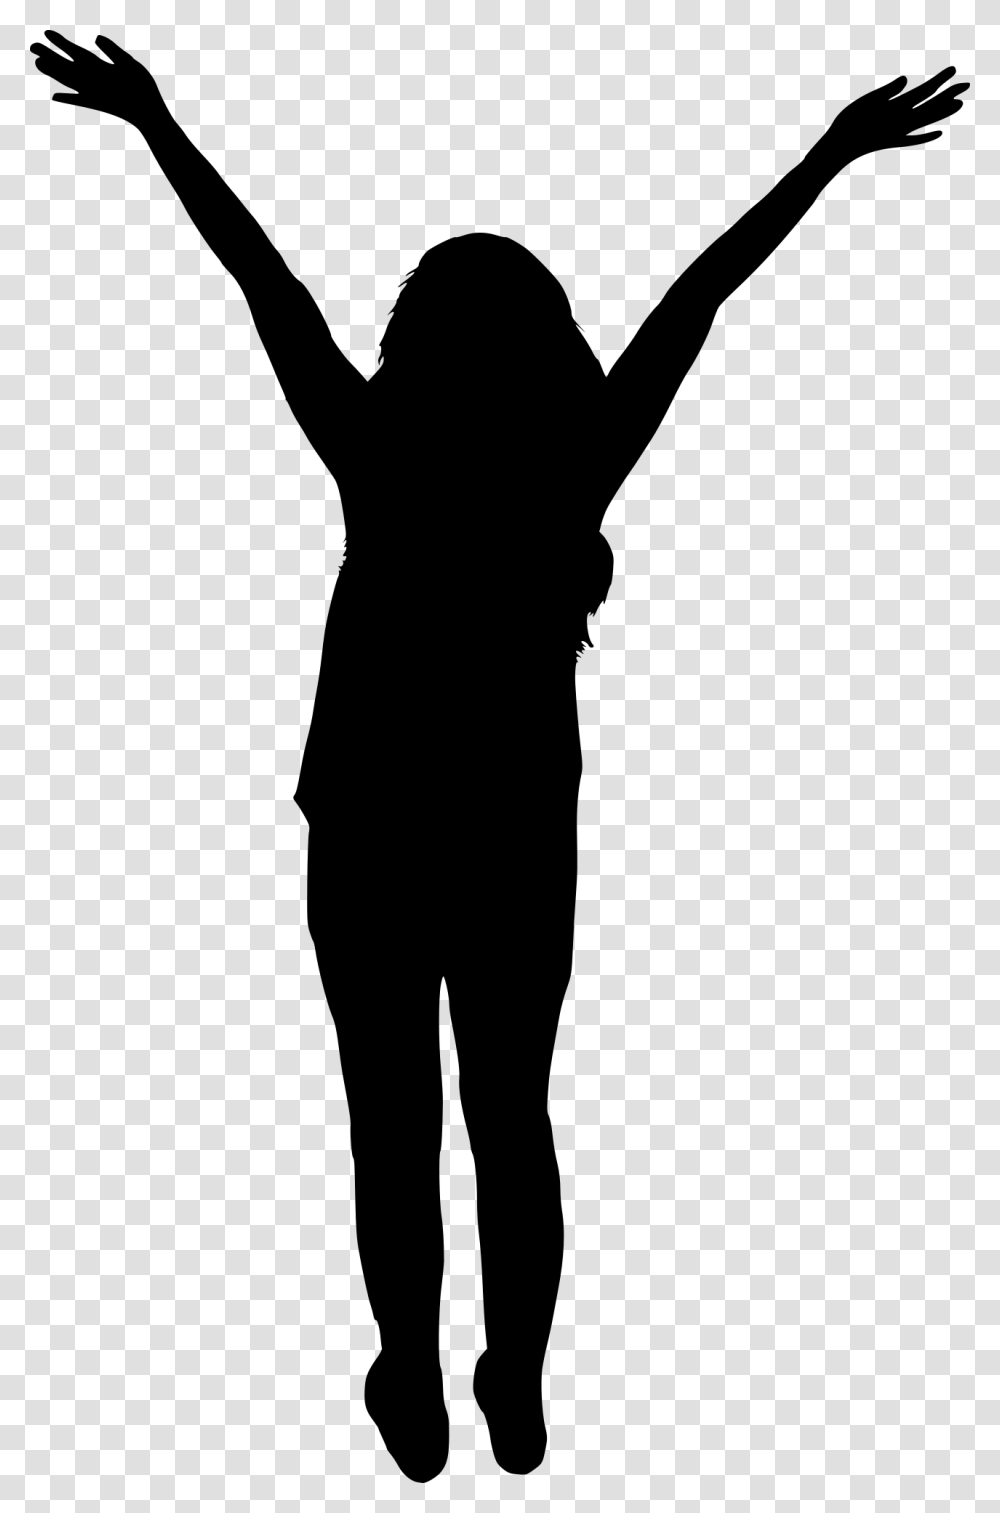 People With Hands Up Silhouette Woman Silhouette Hands Up, Gray Transparent Png